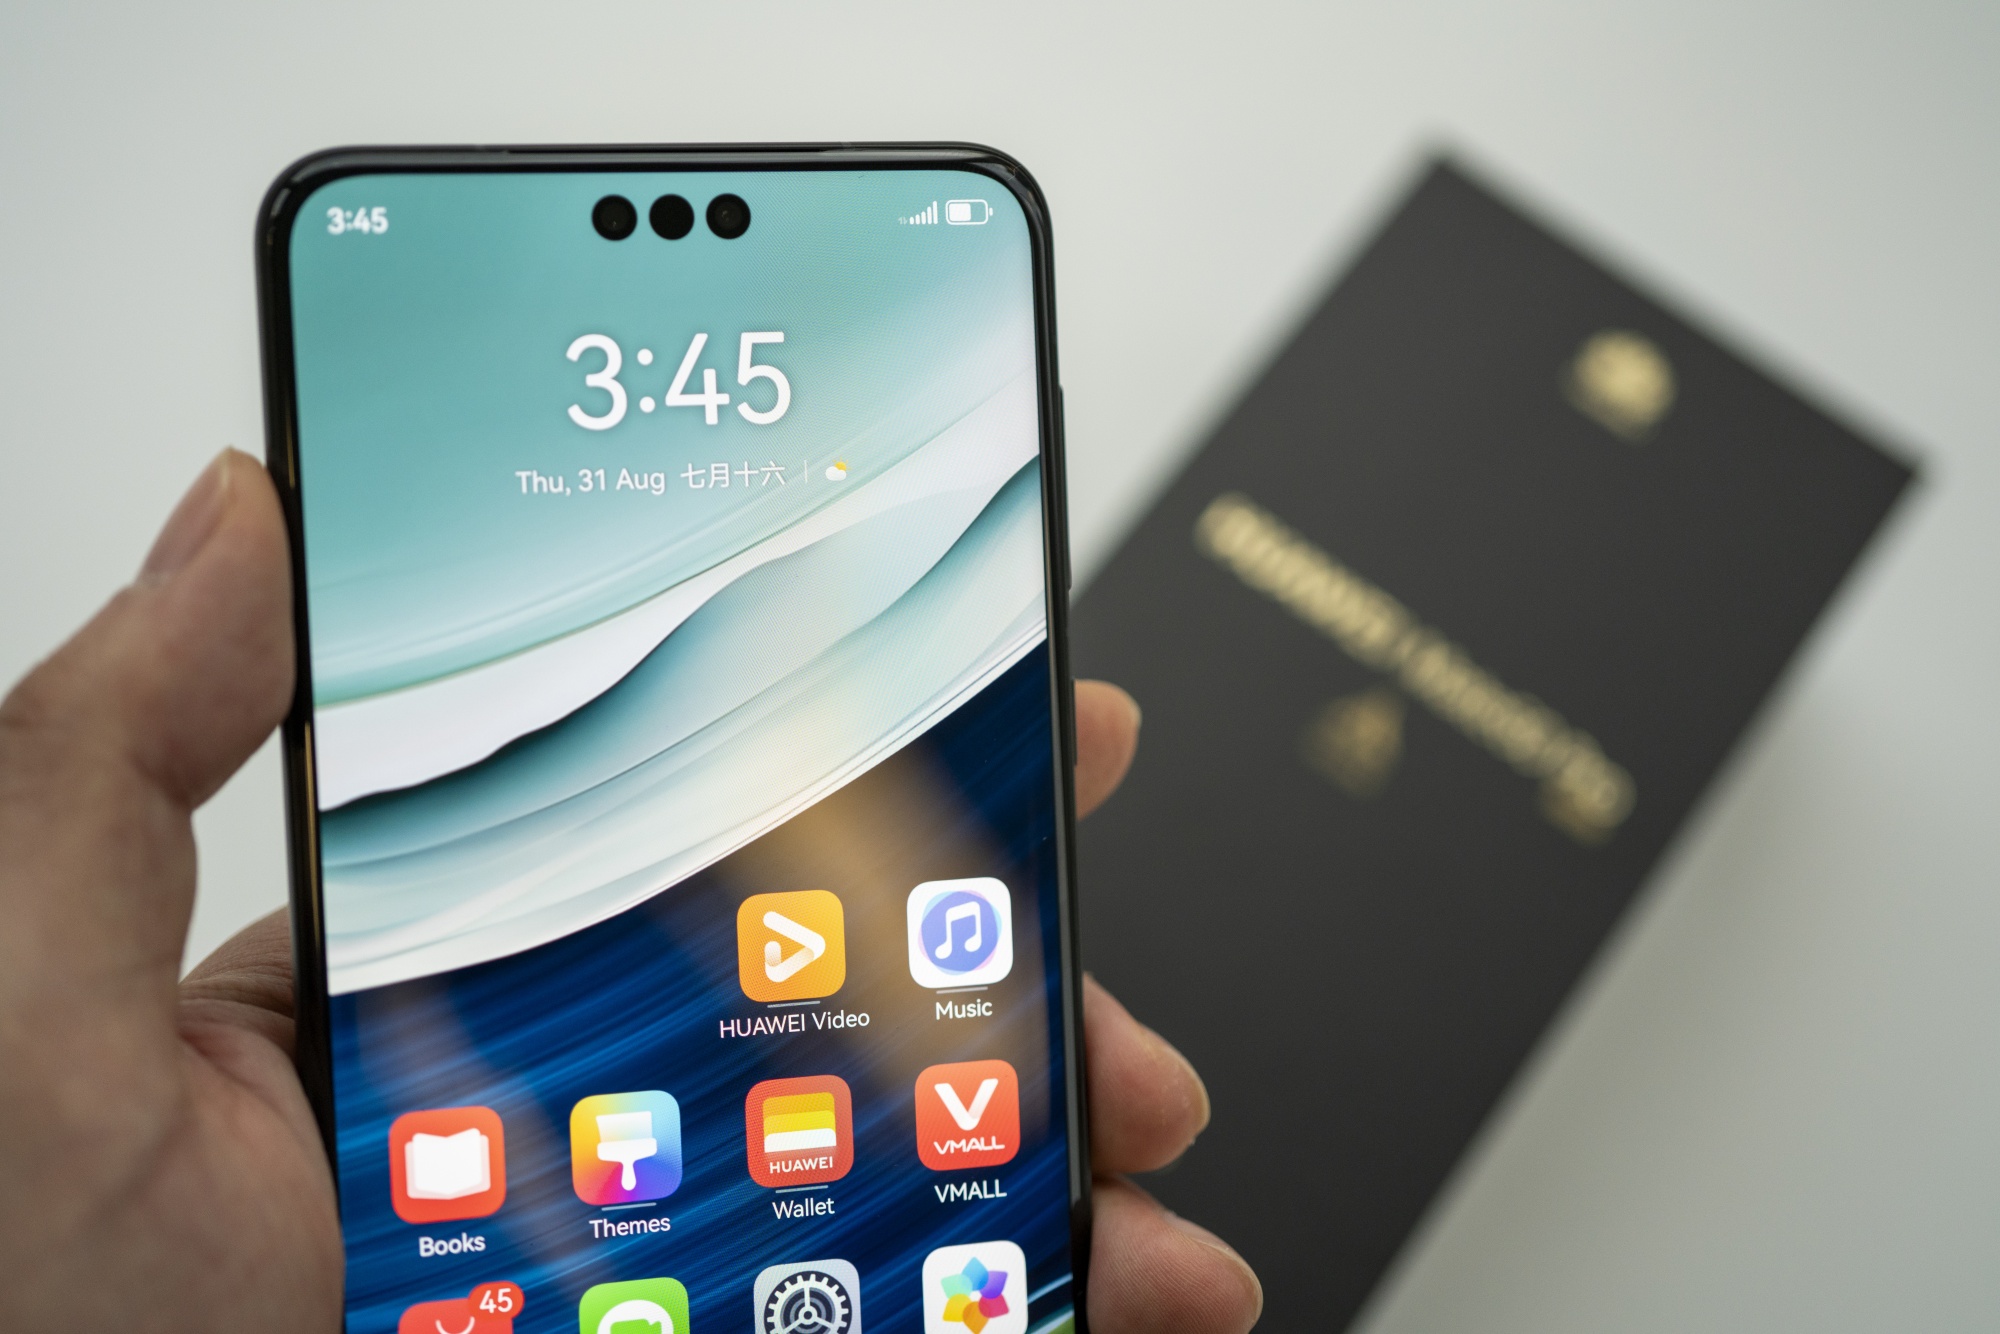 Huawei forced to launch Mate 30 phone without Google apps, Huawei